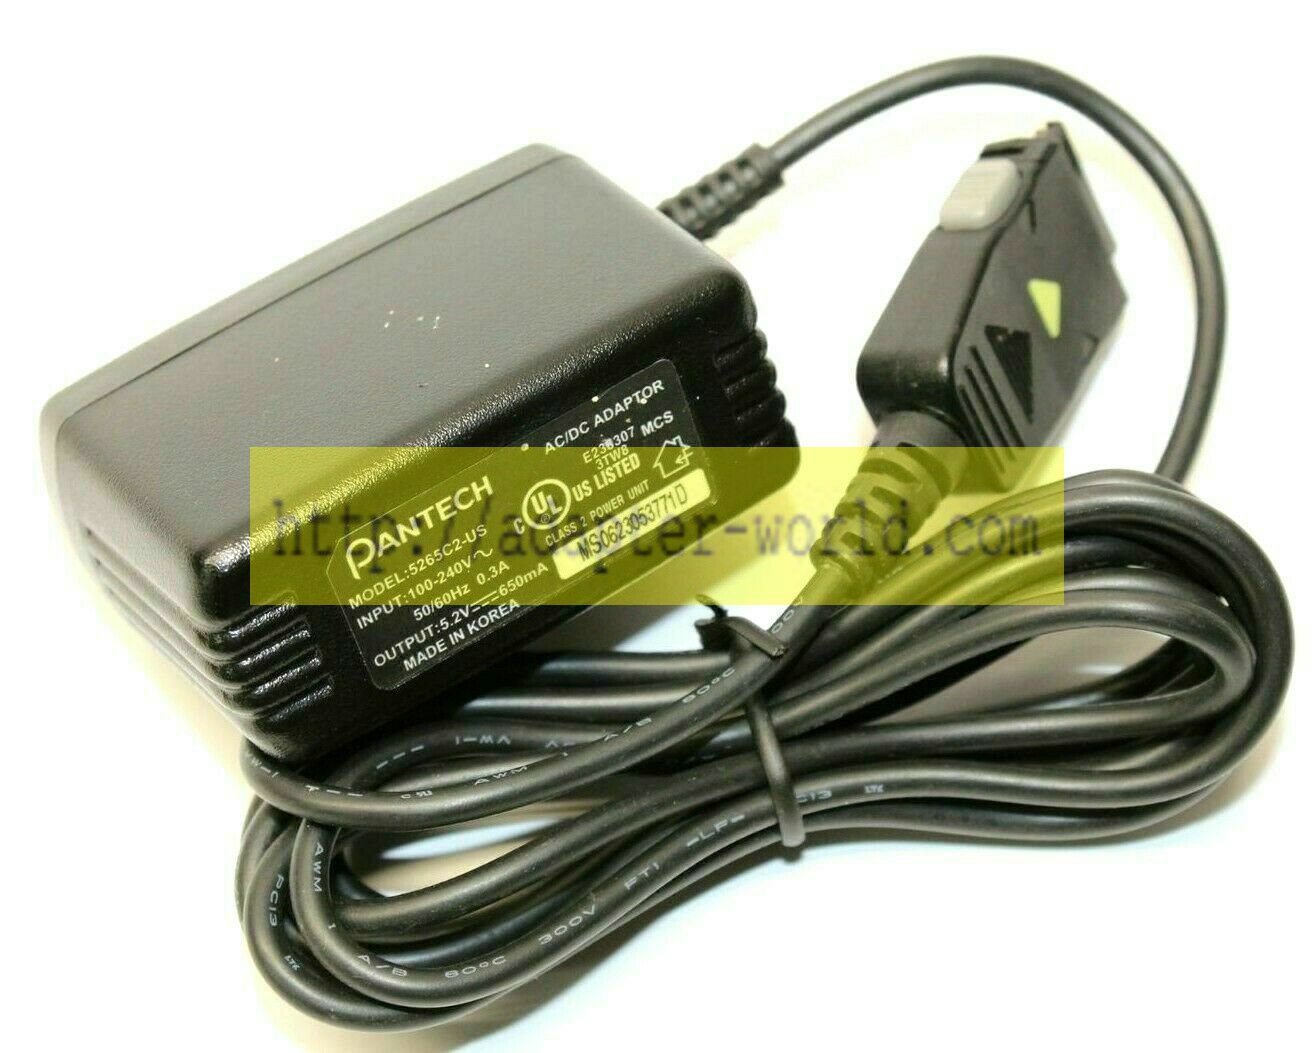 *Brand NEW*Pantech 5265C2-US 5.2V DC 650mA Phone Charger AC Power Adapter